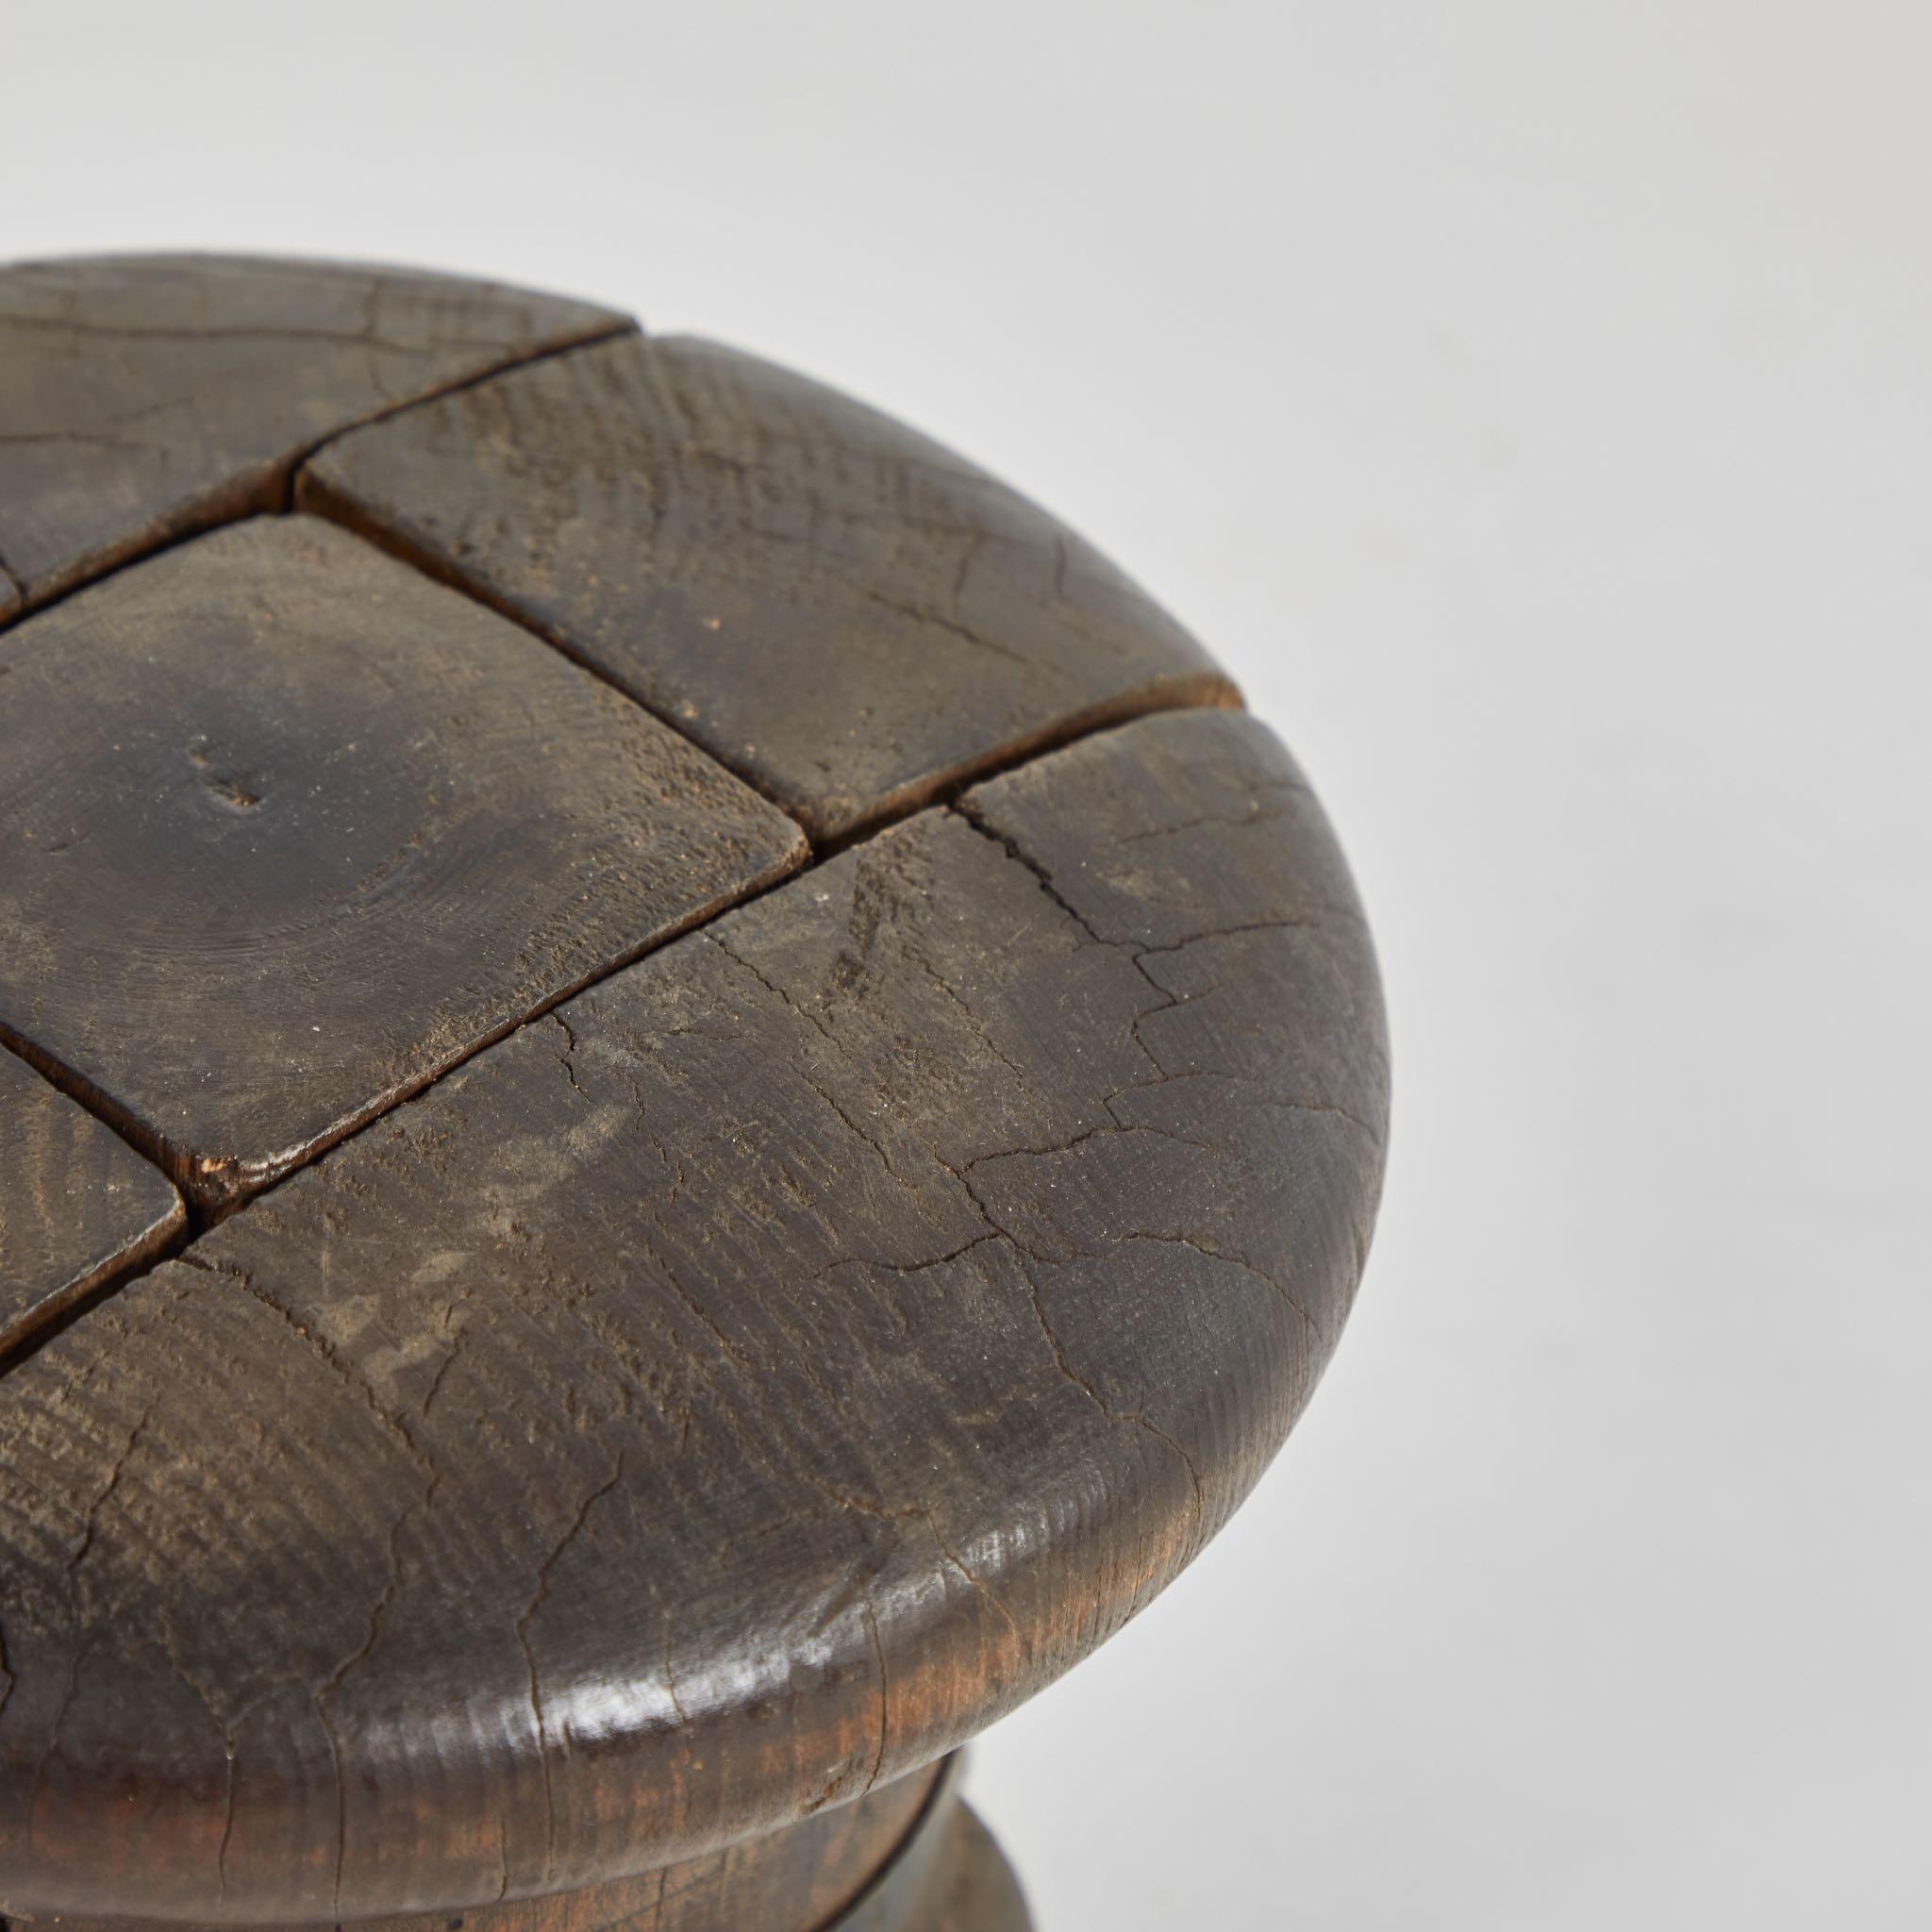 Wooden millinery hat block from early 20th-century France. The button-like structure has been carved from five separate joints of wood, resulting in an interesting, puzzle-like surface. A unique sculptural accent for a tabletop or shelf-scape. Sold